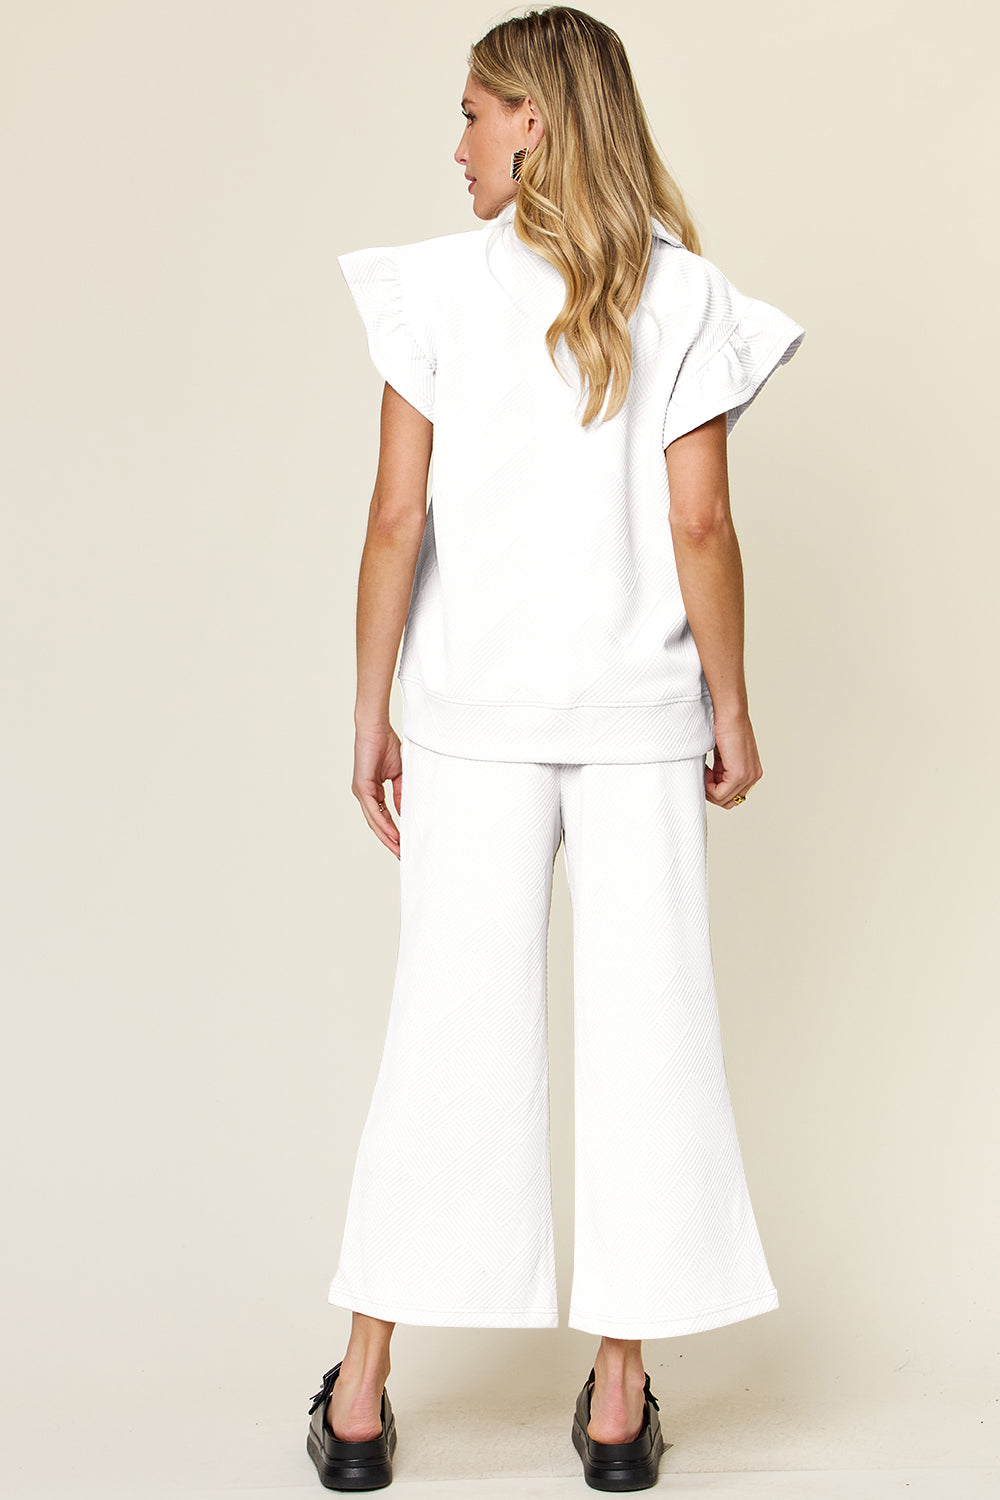 Double Take Texture Ruffle Short Sleeve Top and Drawstring Wide Leg Pants Set - Cowtown Bling N Things